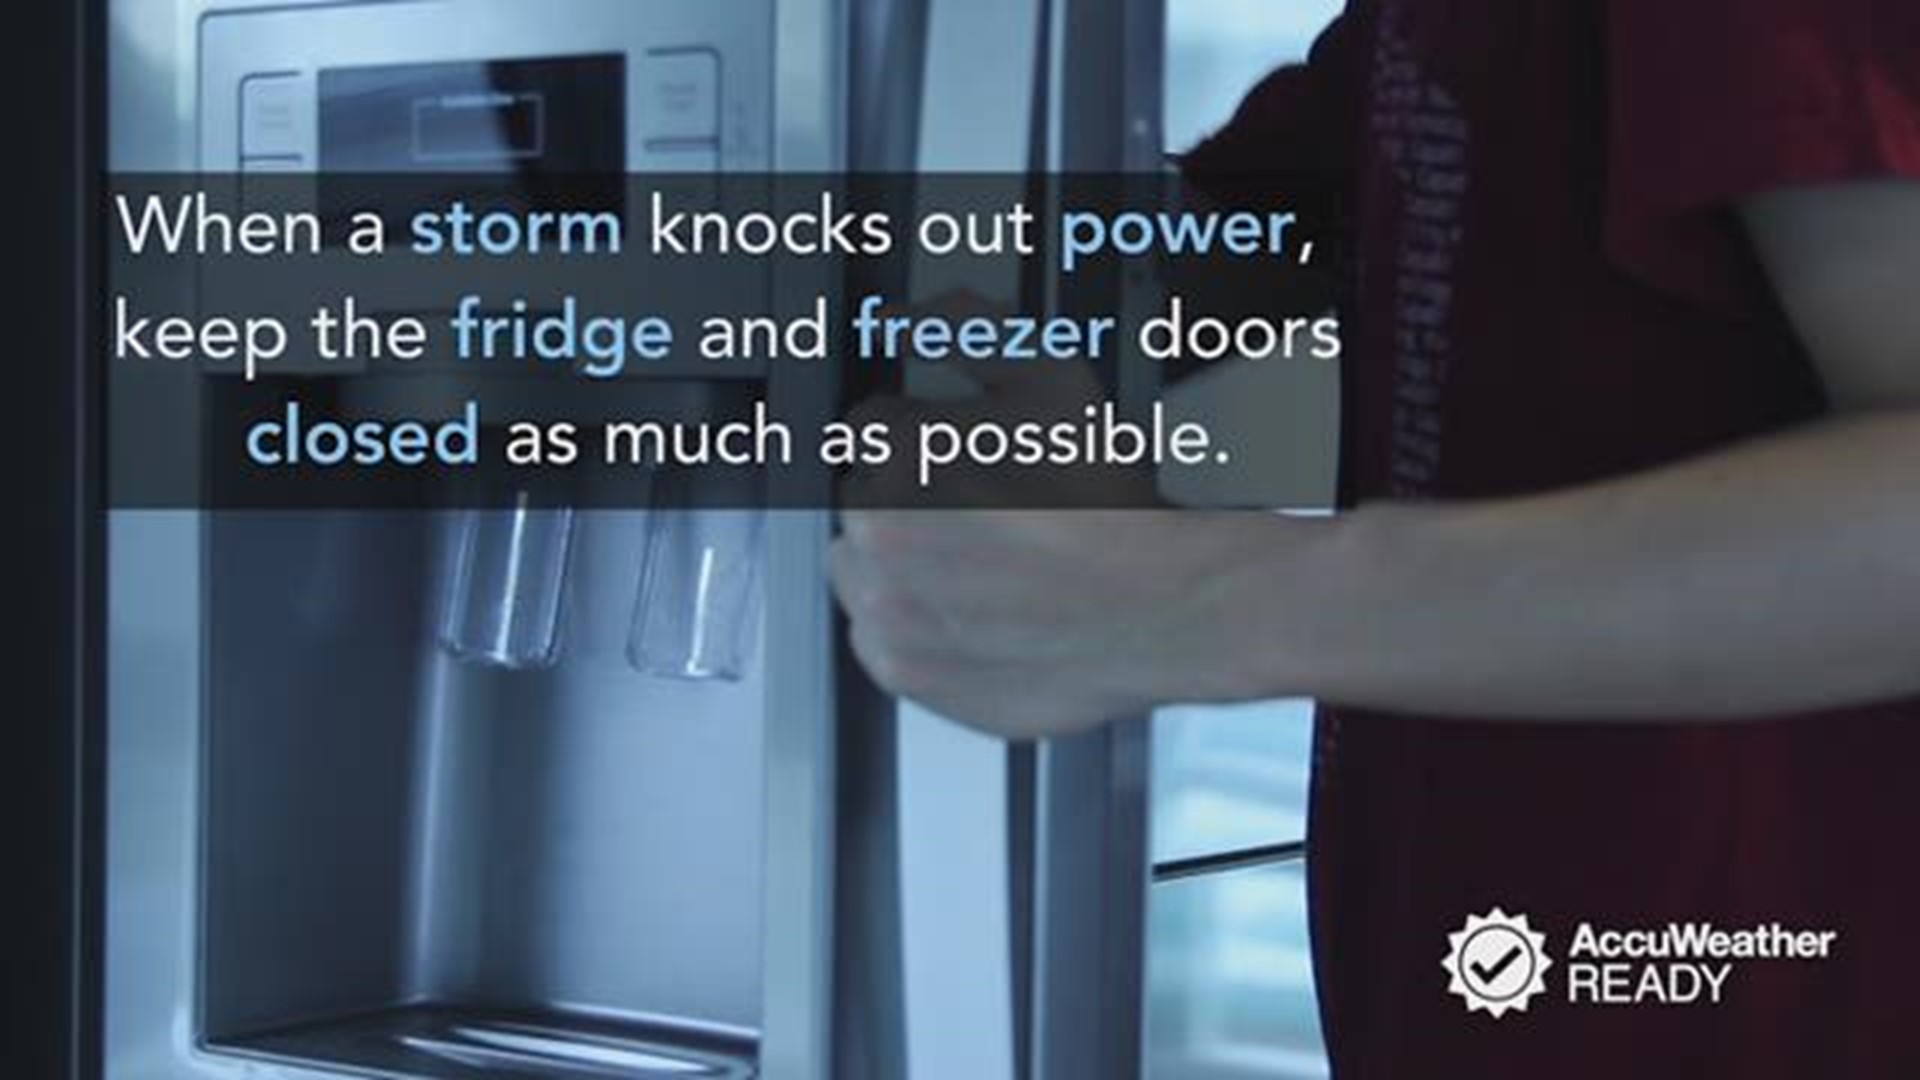 During a power outage, follow these tips to ensure that the food you eat from the fridge or freezer is still safe to eat. 